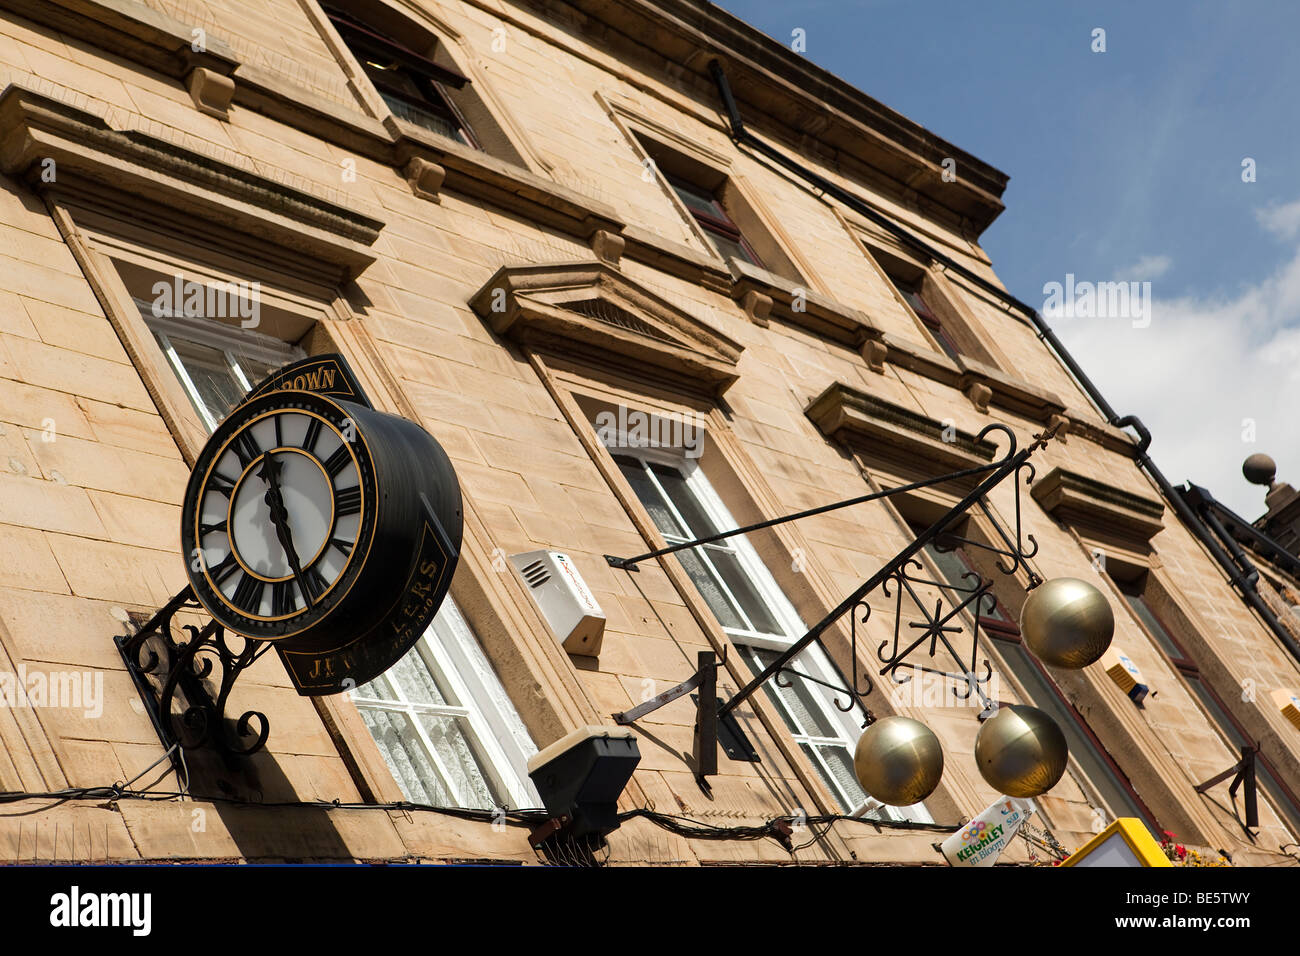 UK, England, Yorkshire, Keighley, East Parade, three brass balls hanging outside pawnbrokers shop Stock Photo